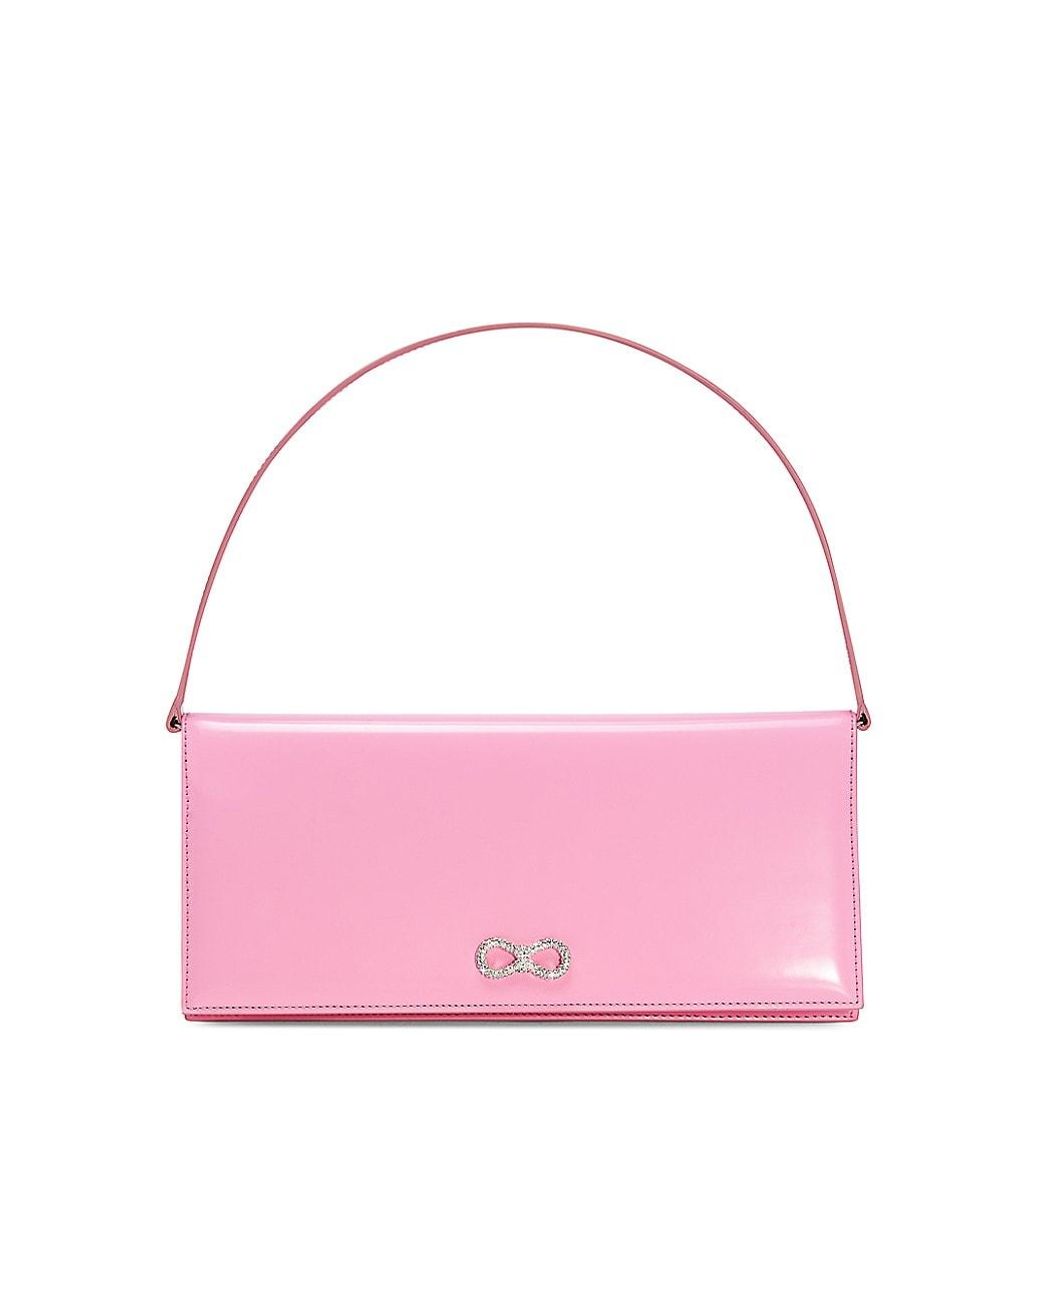 Mach & Mach Crystal Bow Patent Leather Baguette Bag in Pink | Lyst